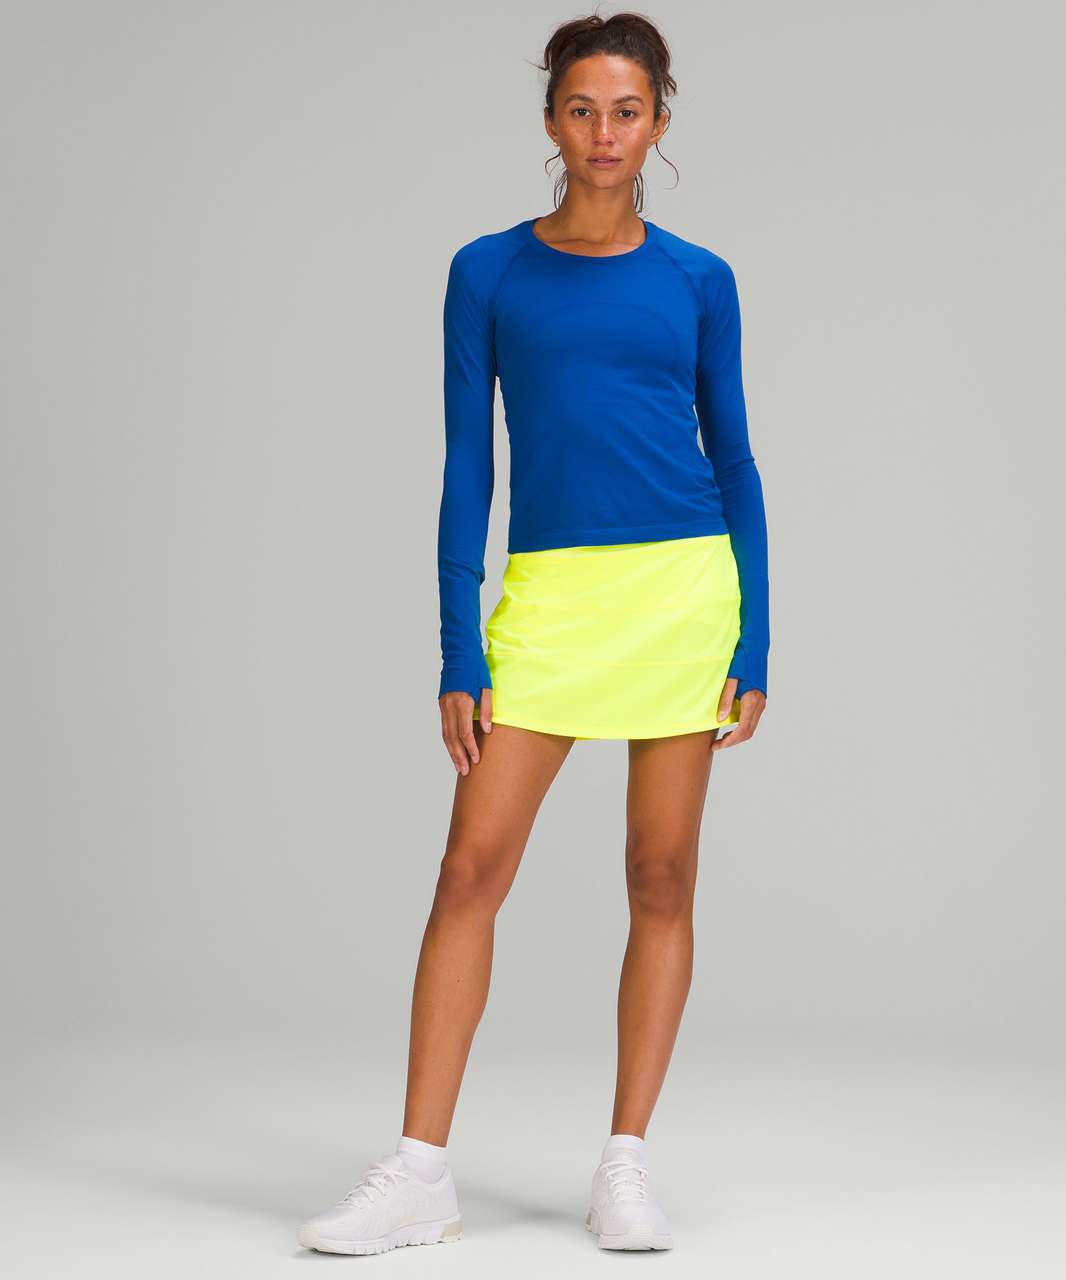 Lululemon Pace Rival Mid-Rise Skirt 15" Length *Tall - Highlight Yellow